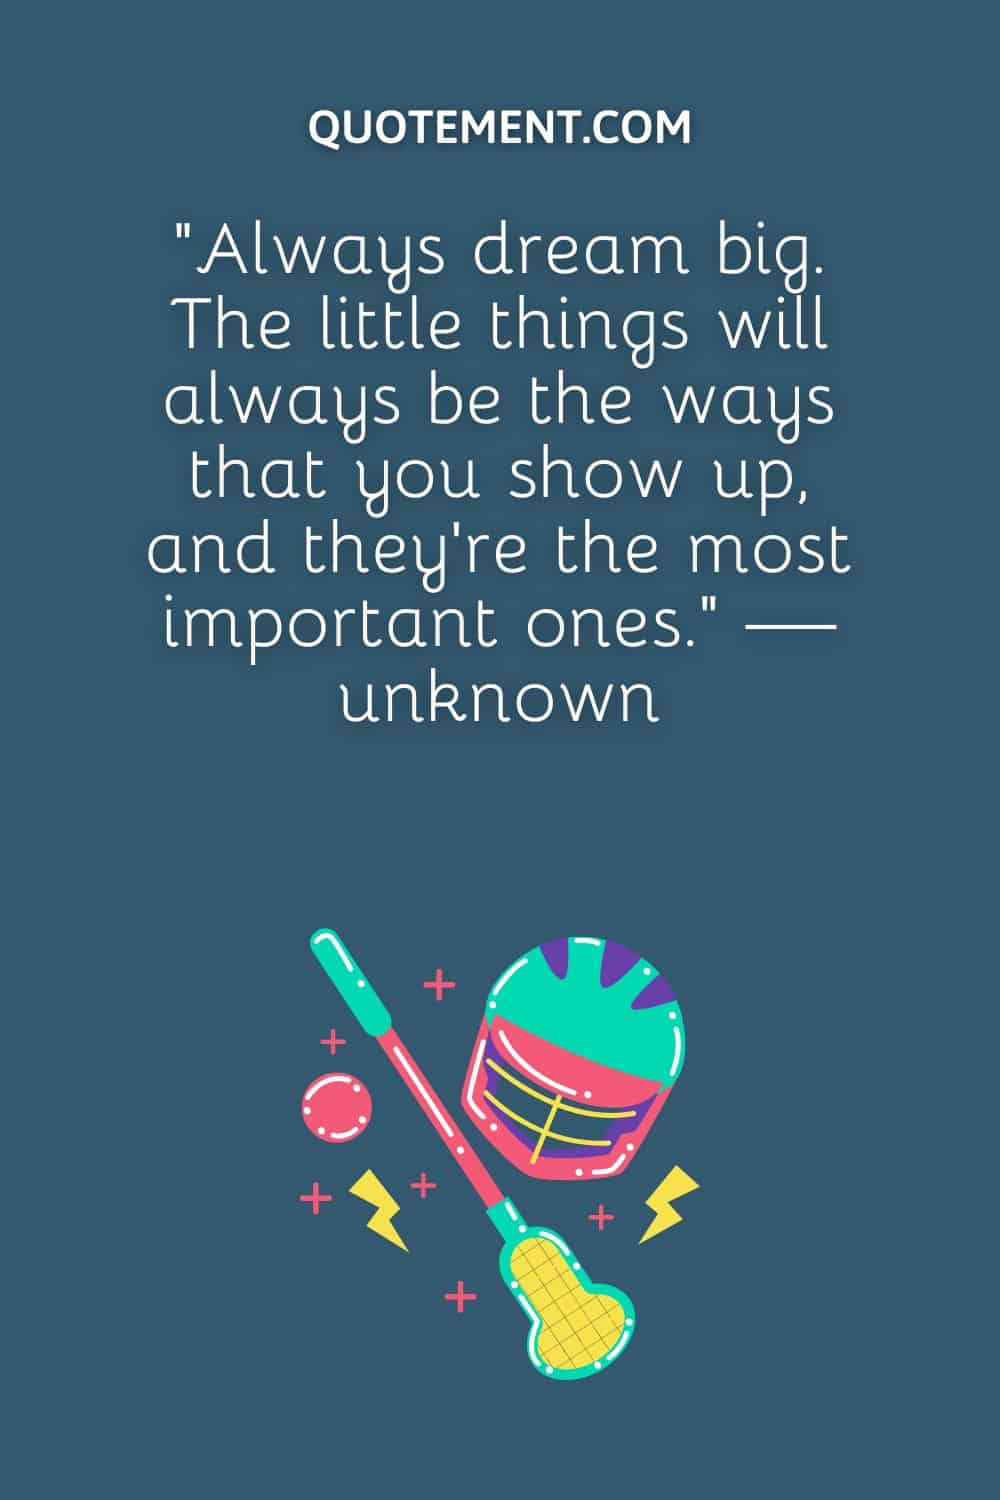 “Always dream big. The little things will always be the ways that you show up, and they’re the most important ones.” — unknown